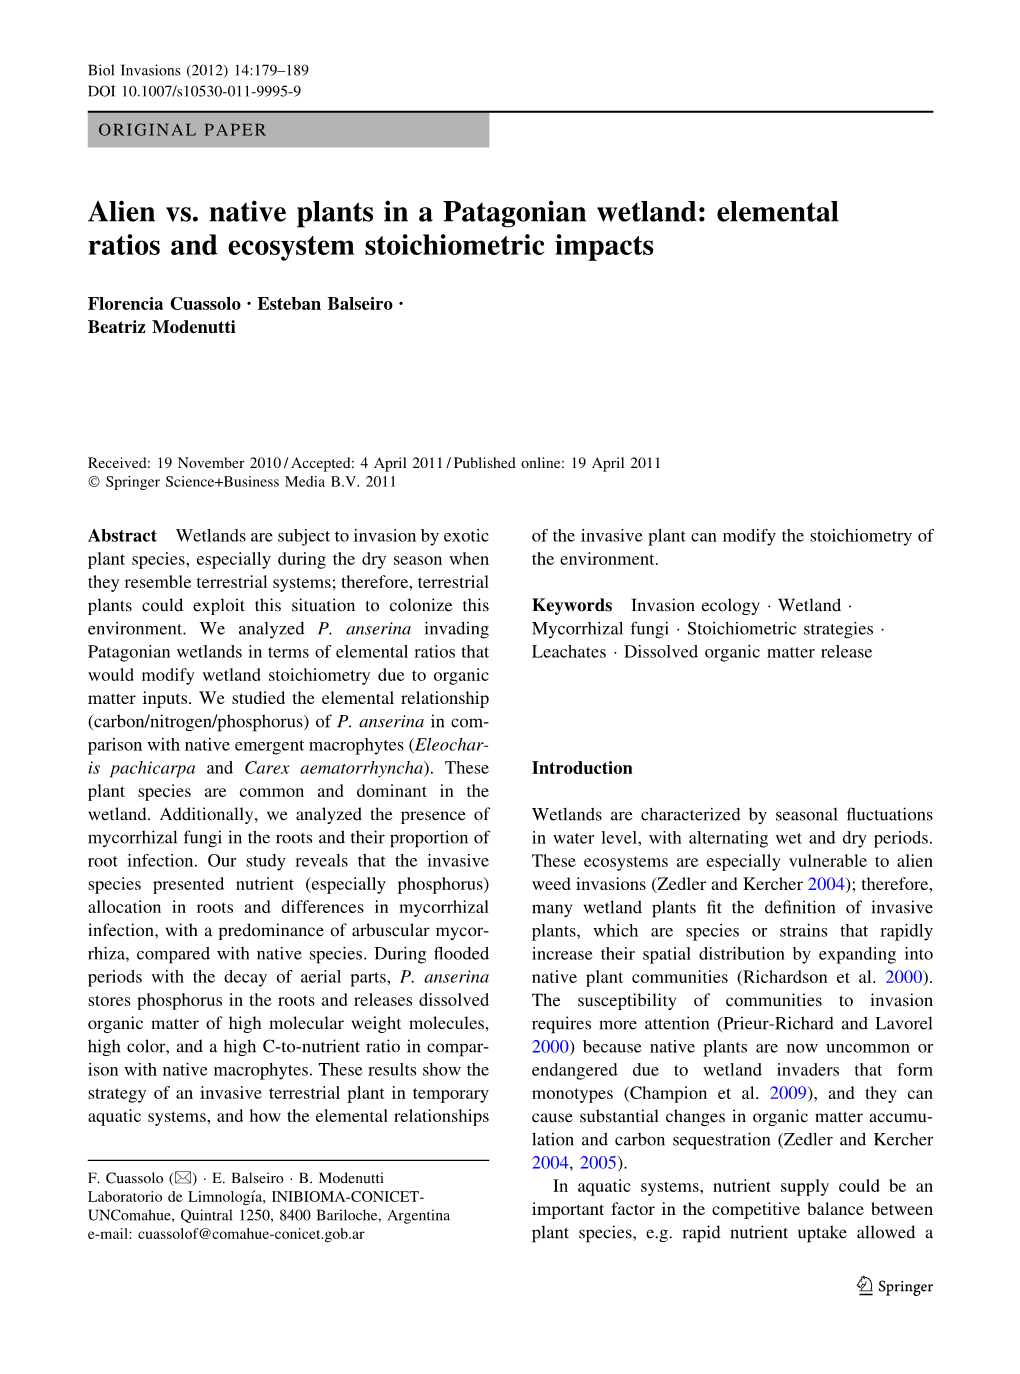 Alien Vs. Native Plants in a Patagonian Wetland: Elemental Ratios and Ecosystem Stoichiometric Impacts